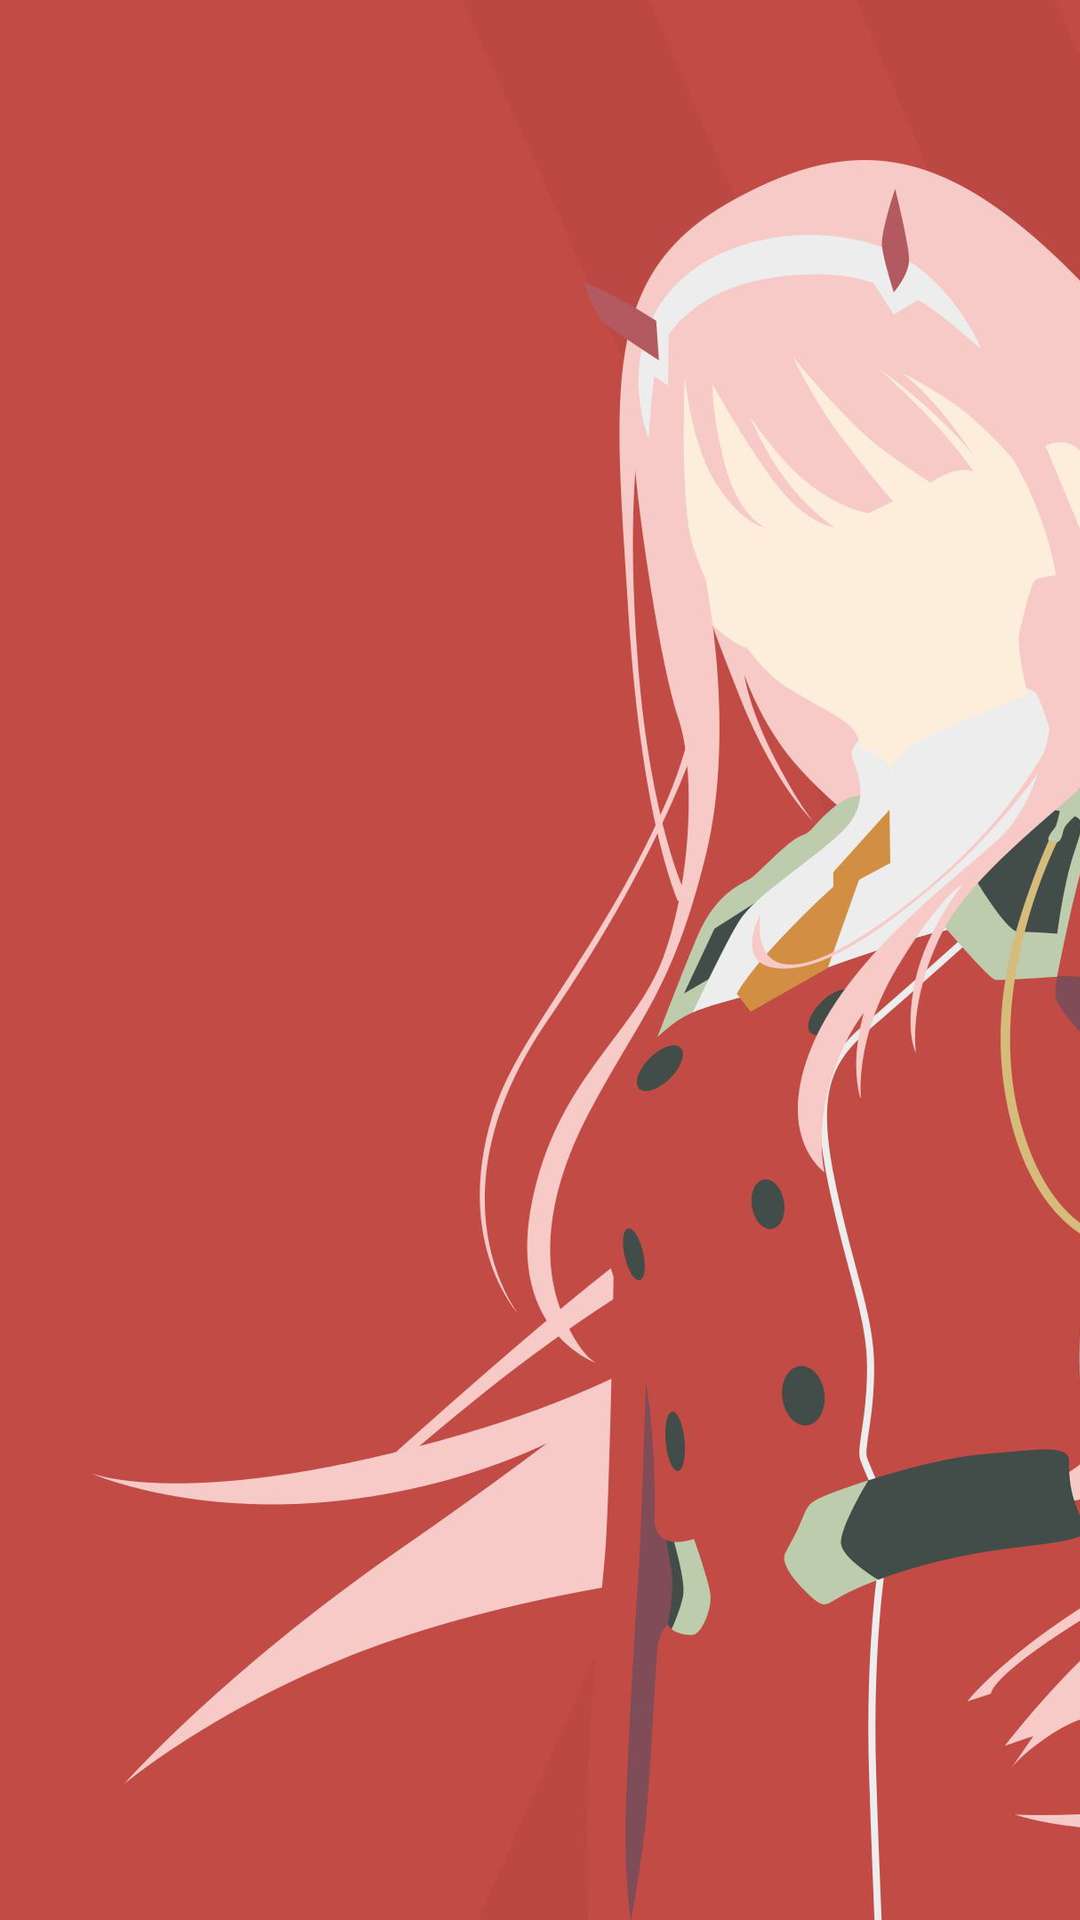 233 Zero Two Wallpapers for iPhone and Android by Sara Byrd